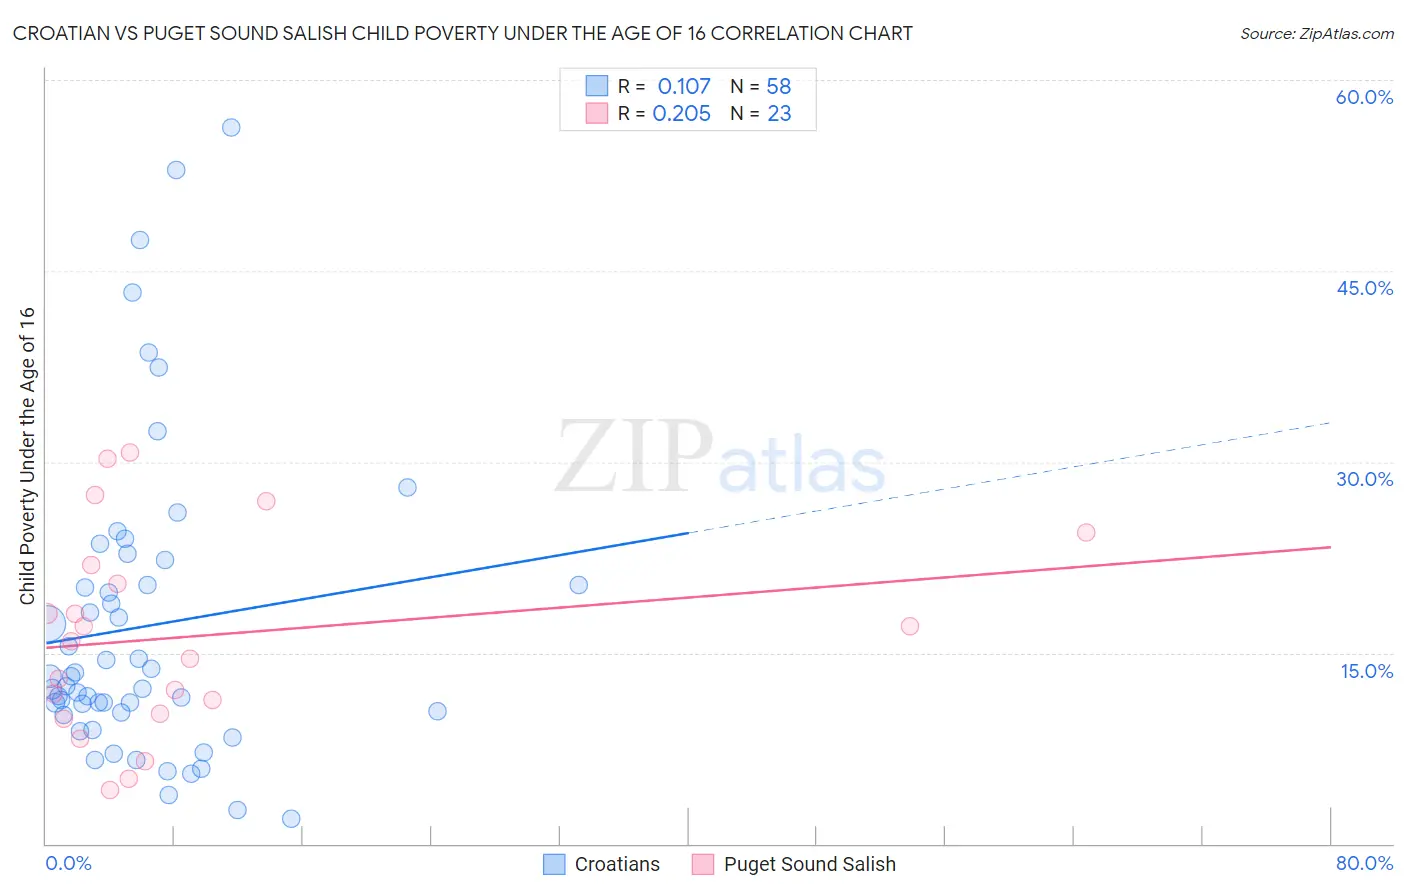 Croatian vs Puget Sound Salish Child Poverty Under the Age of 16